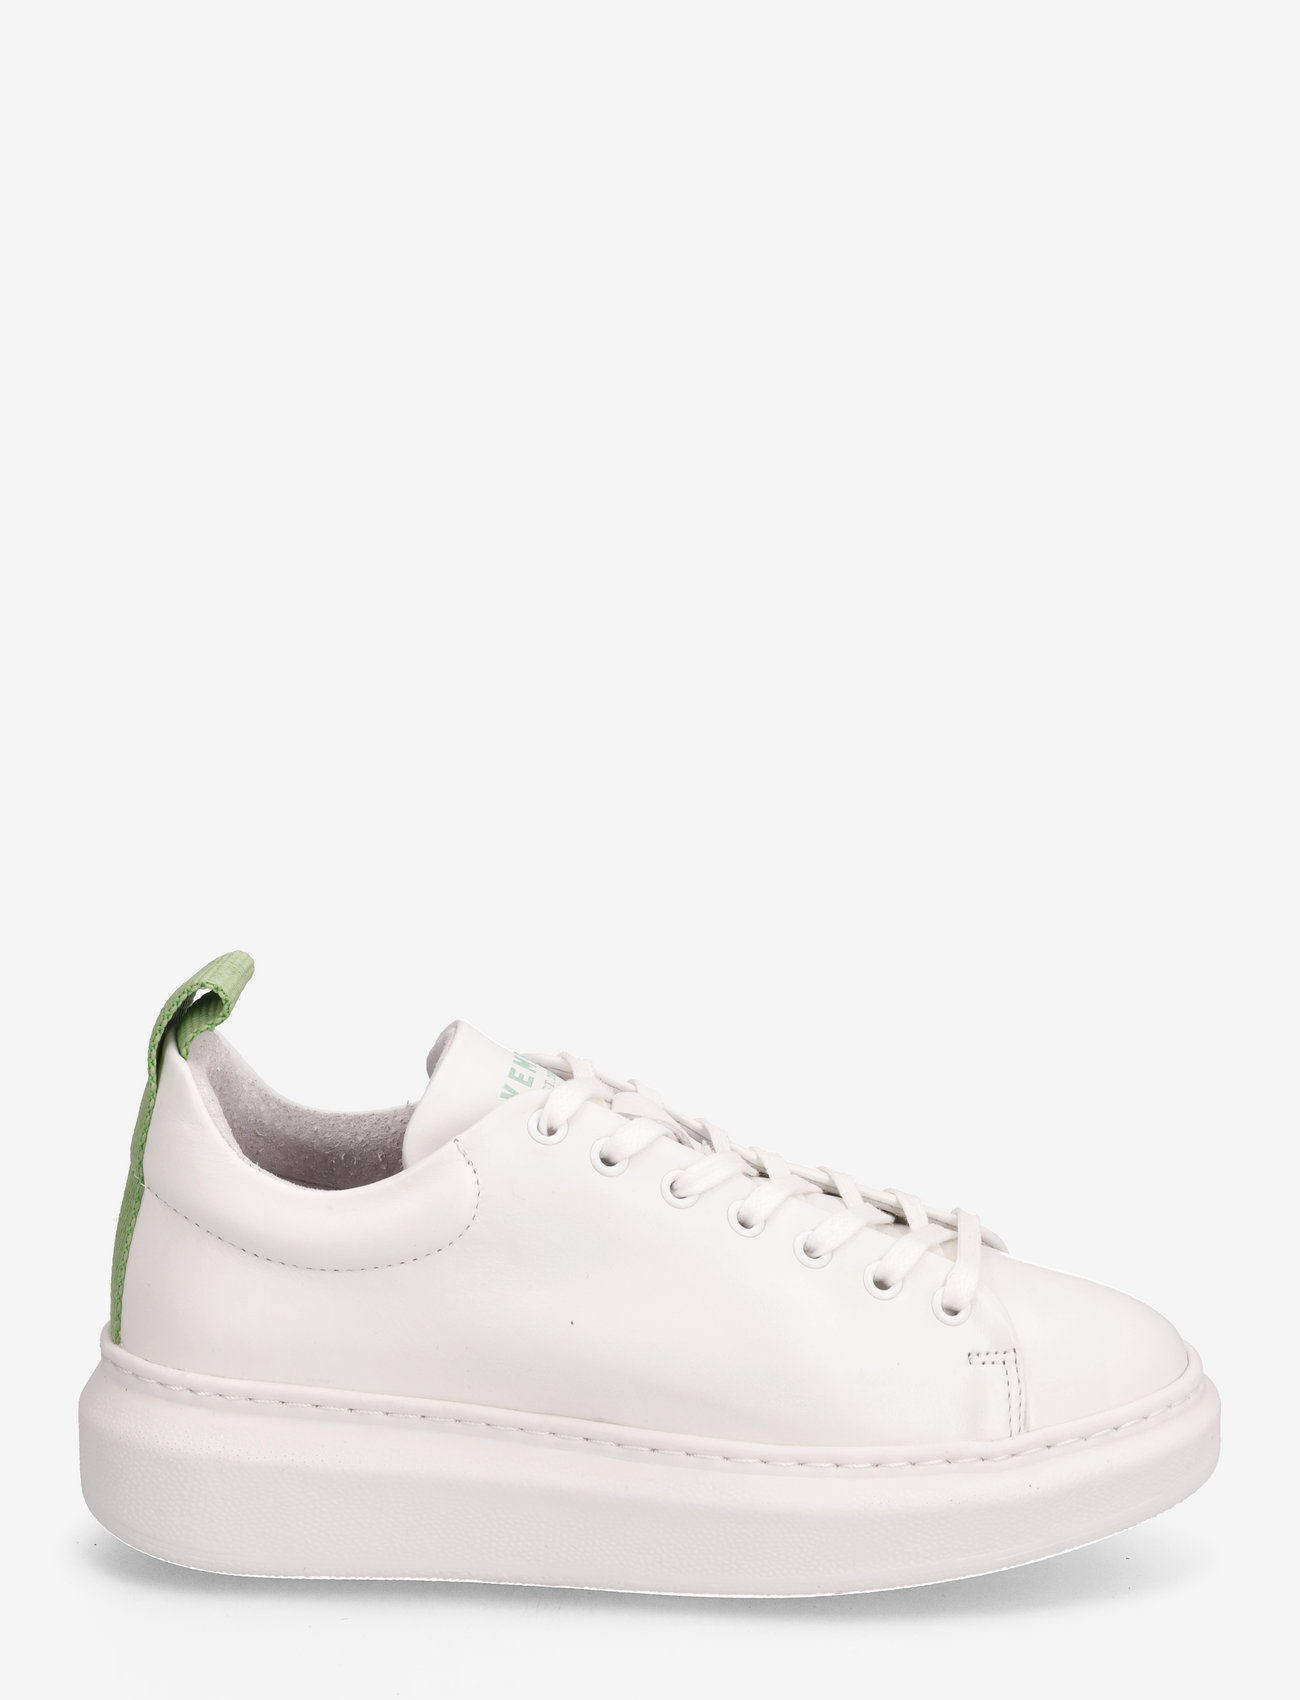 Pavement - Dee color - lave sneakers - white/green 424 - 1